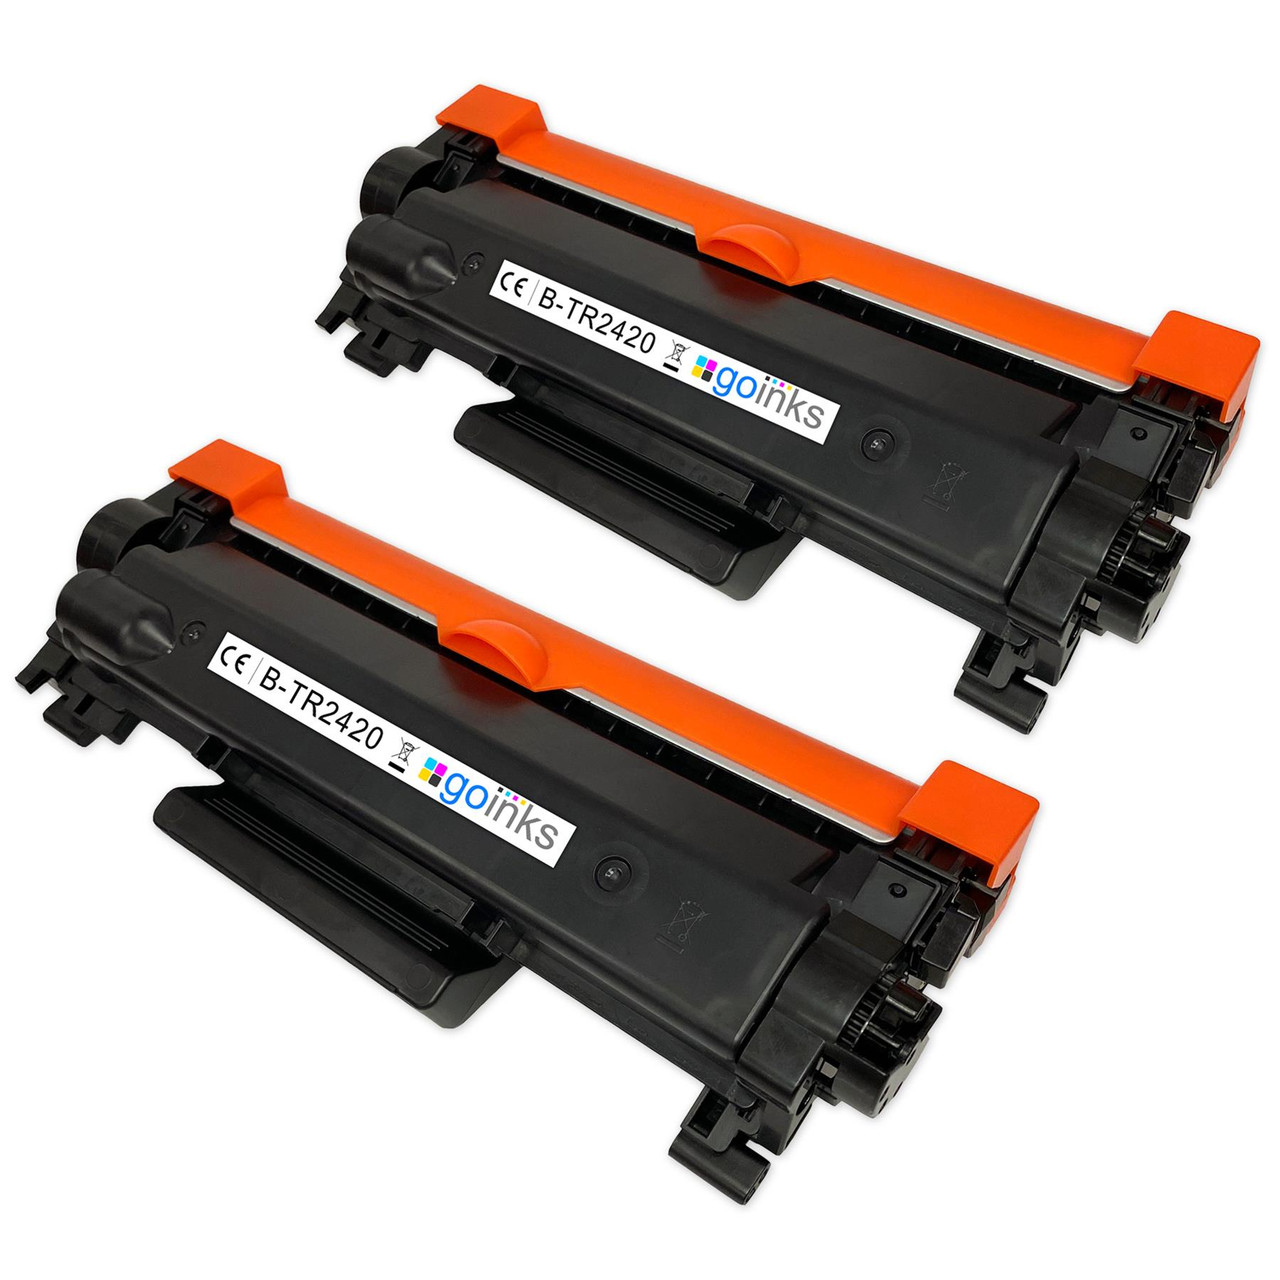 TN 2420 toner Unboxing and Replace to Brother MFC L2710DW, L2750DW Printer  